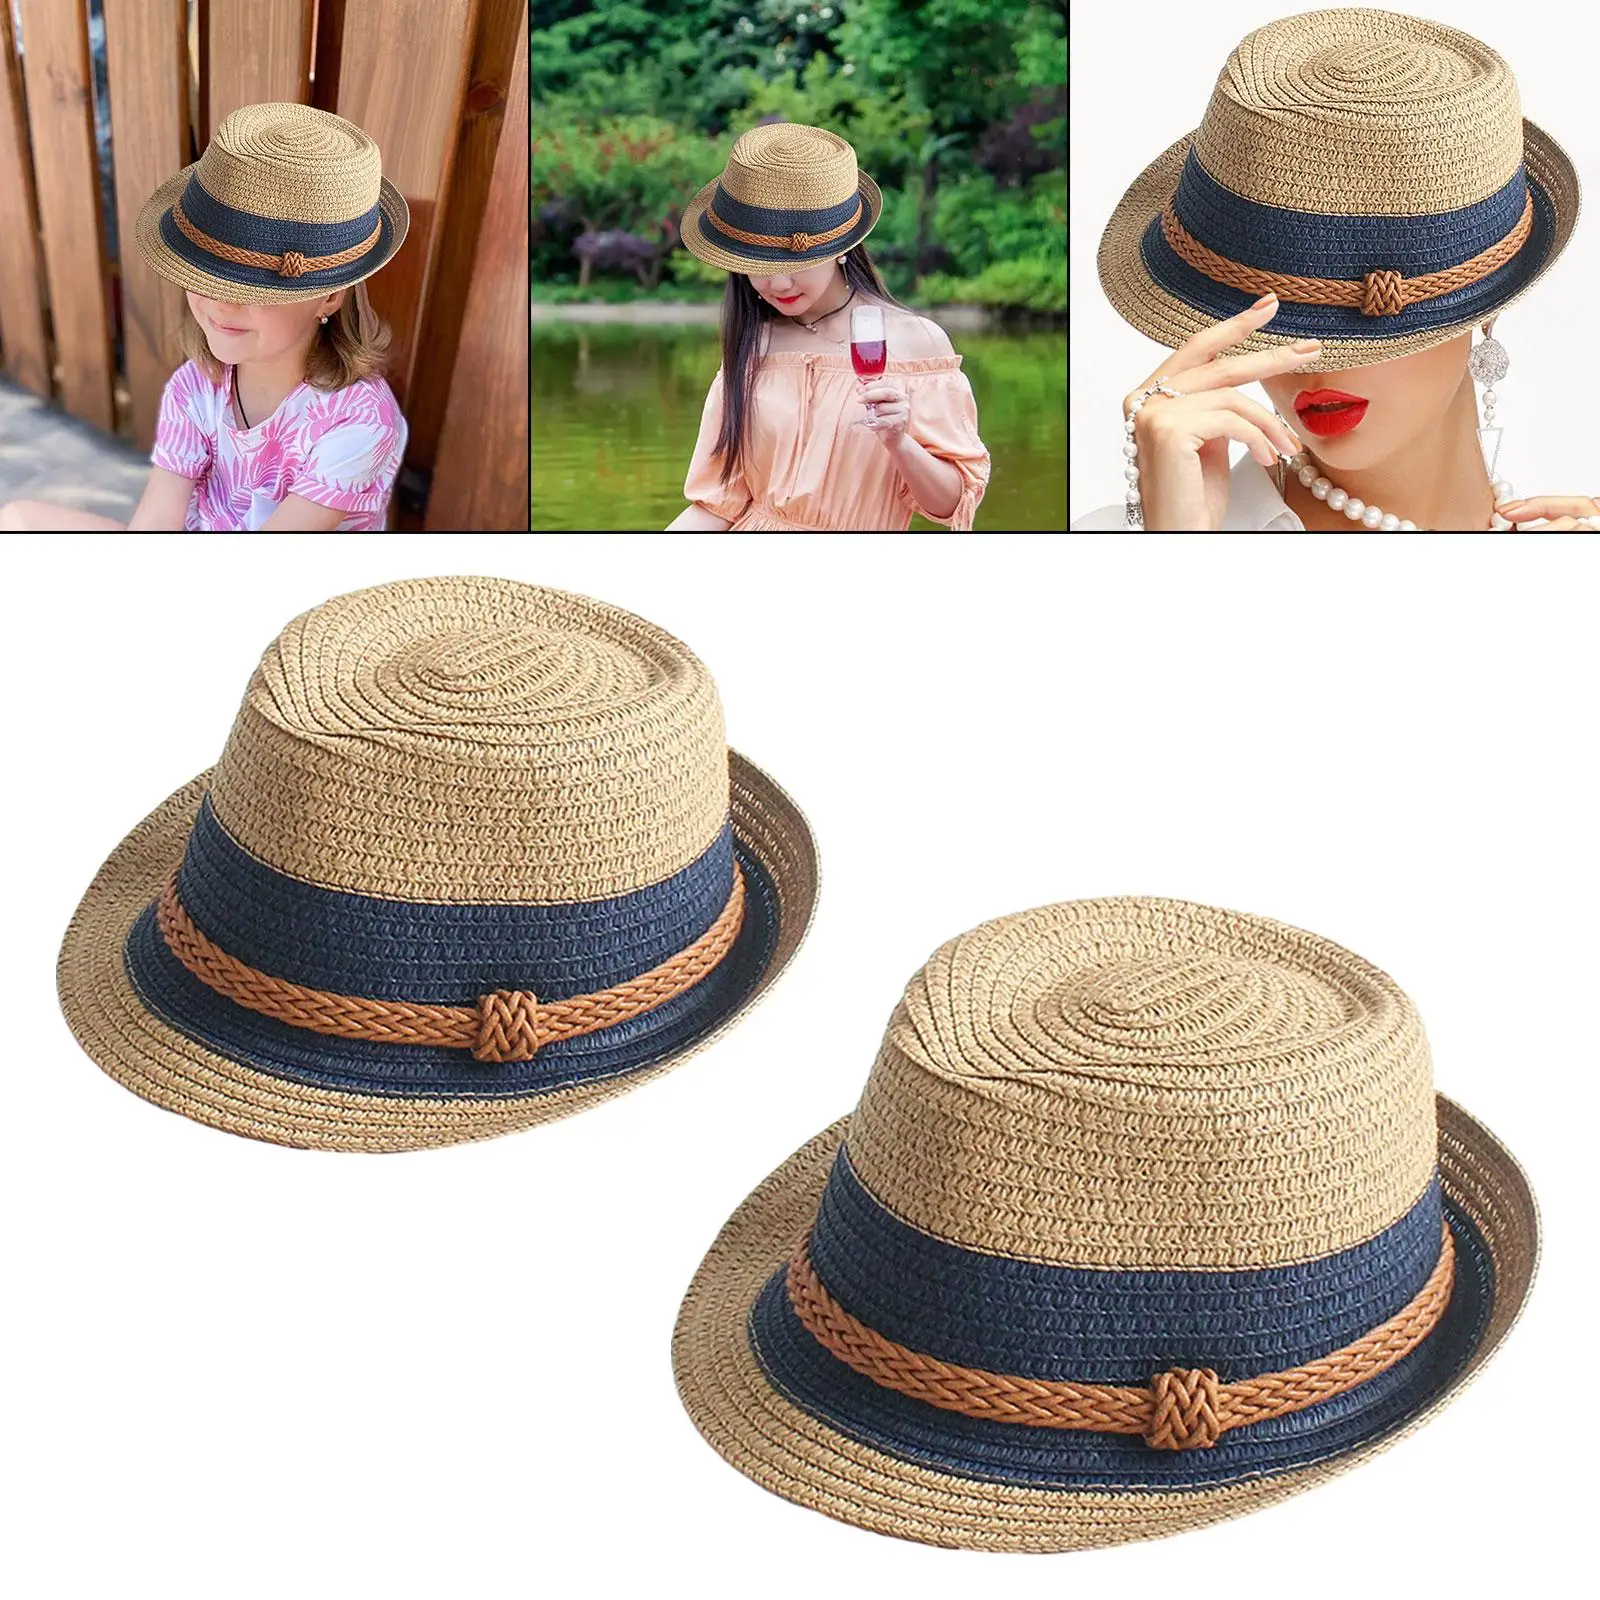 Top Hat Beach Hat Sun Protection Fashion Summer Breathable Straw Hat Sun Hat for Vocations Holidays Parties Gift Street